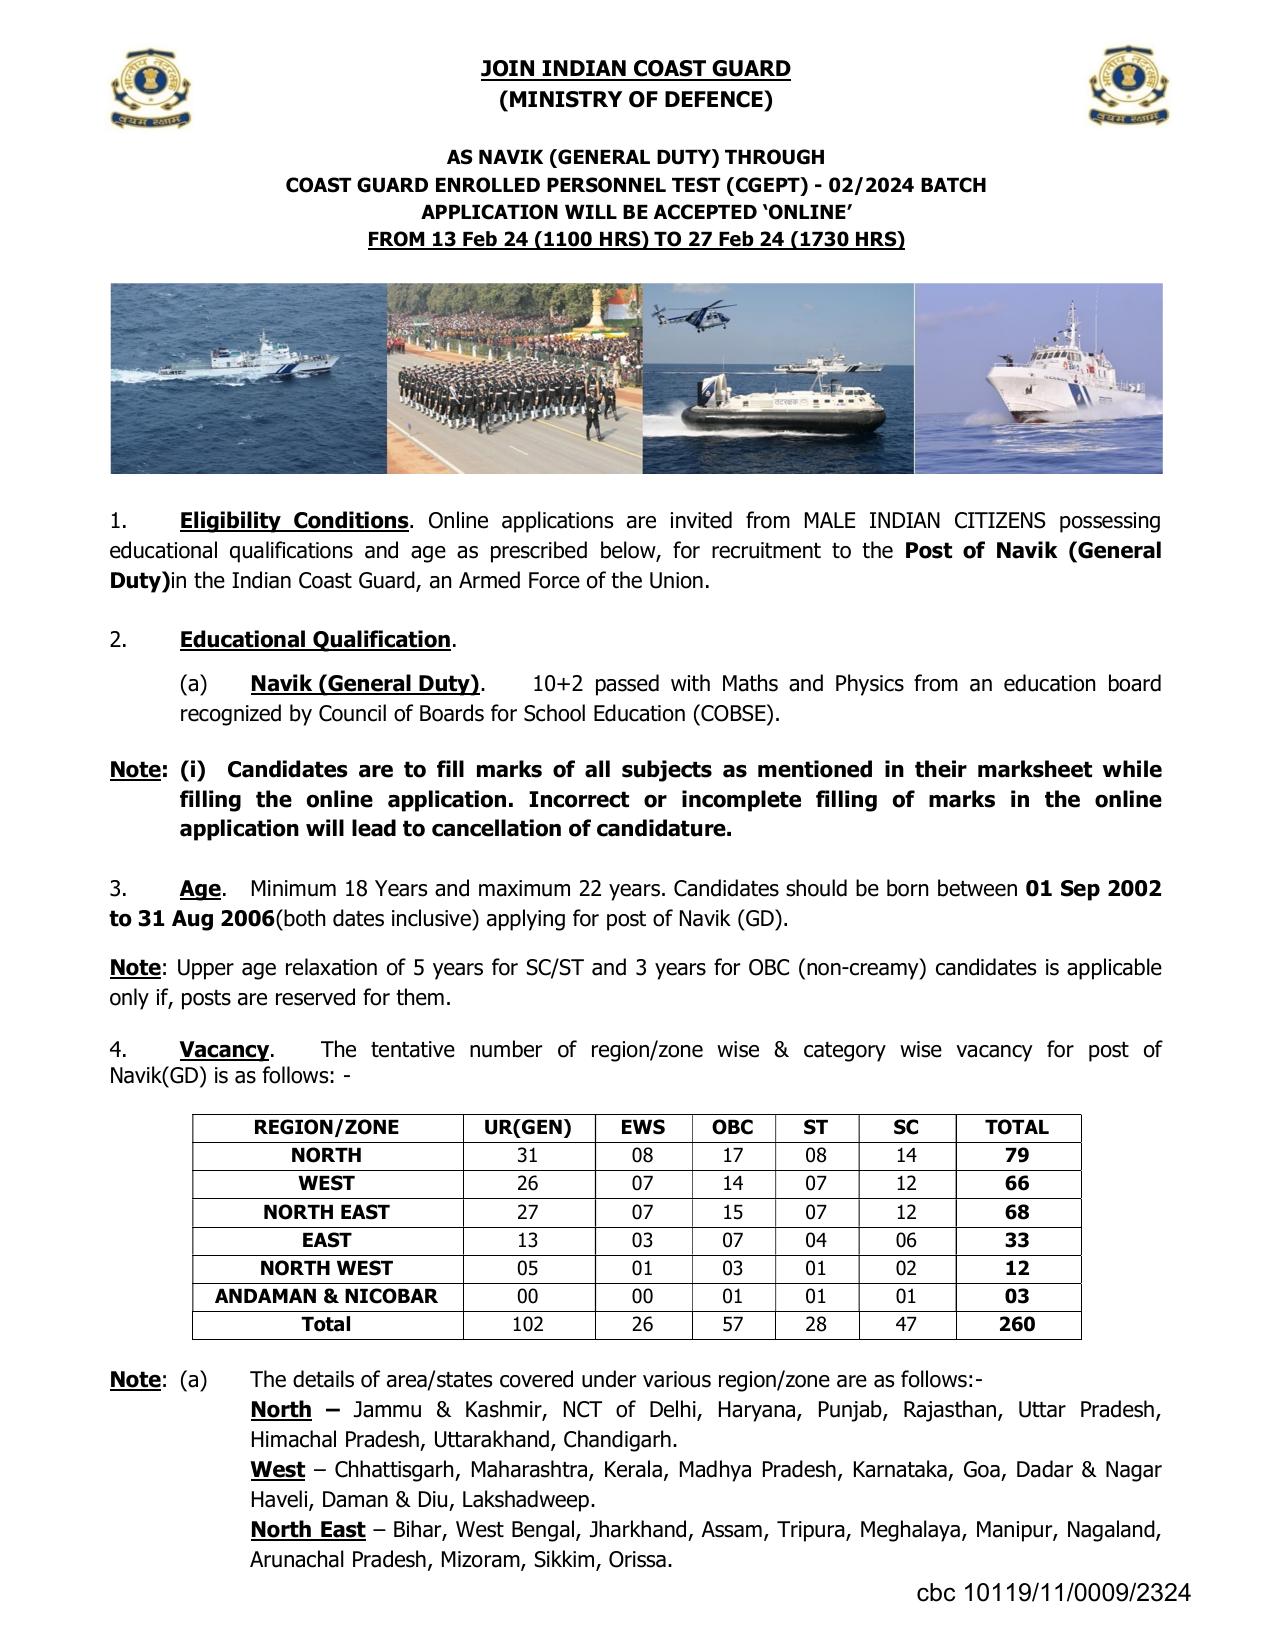 Indian Coast Guard Recruitment: for Navik (General Duty) - 260 Posts - Page 1